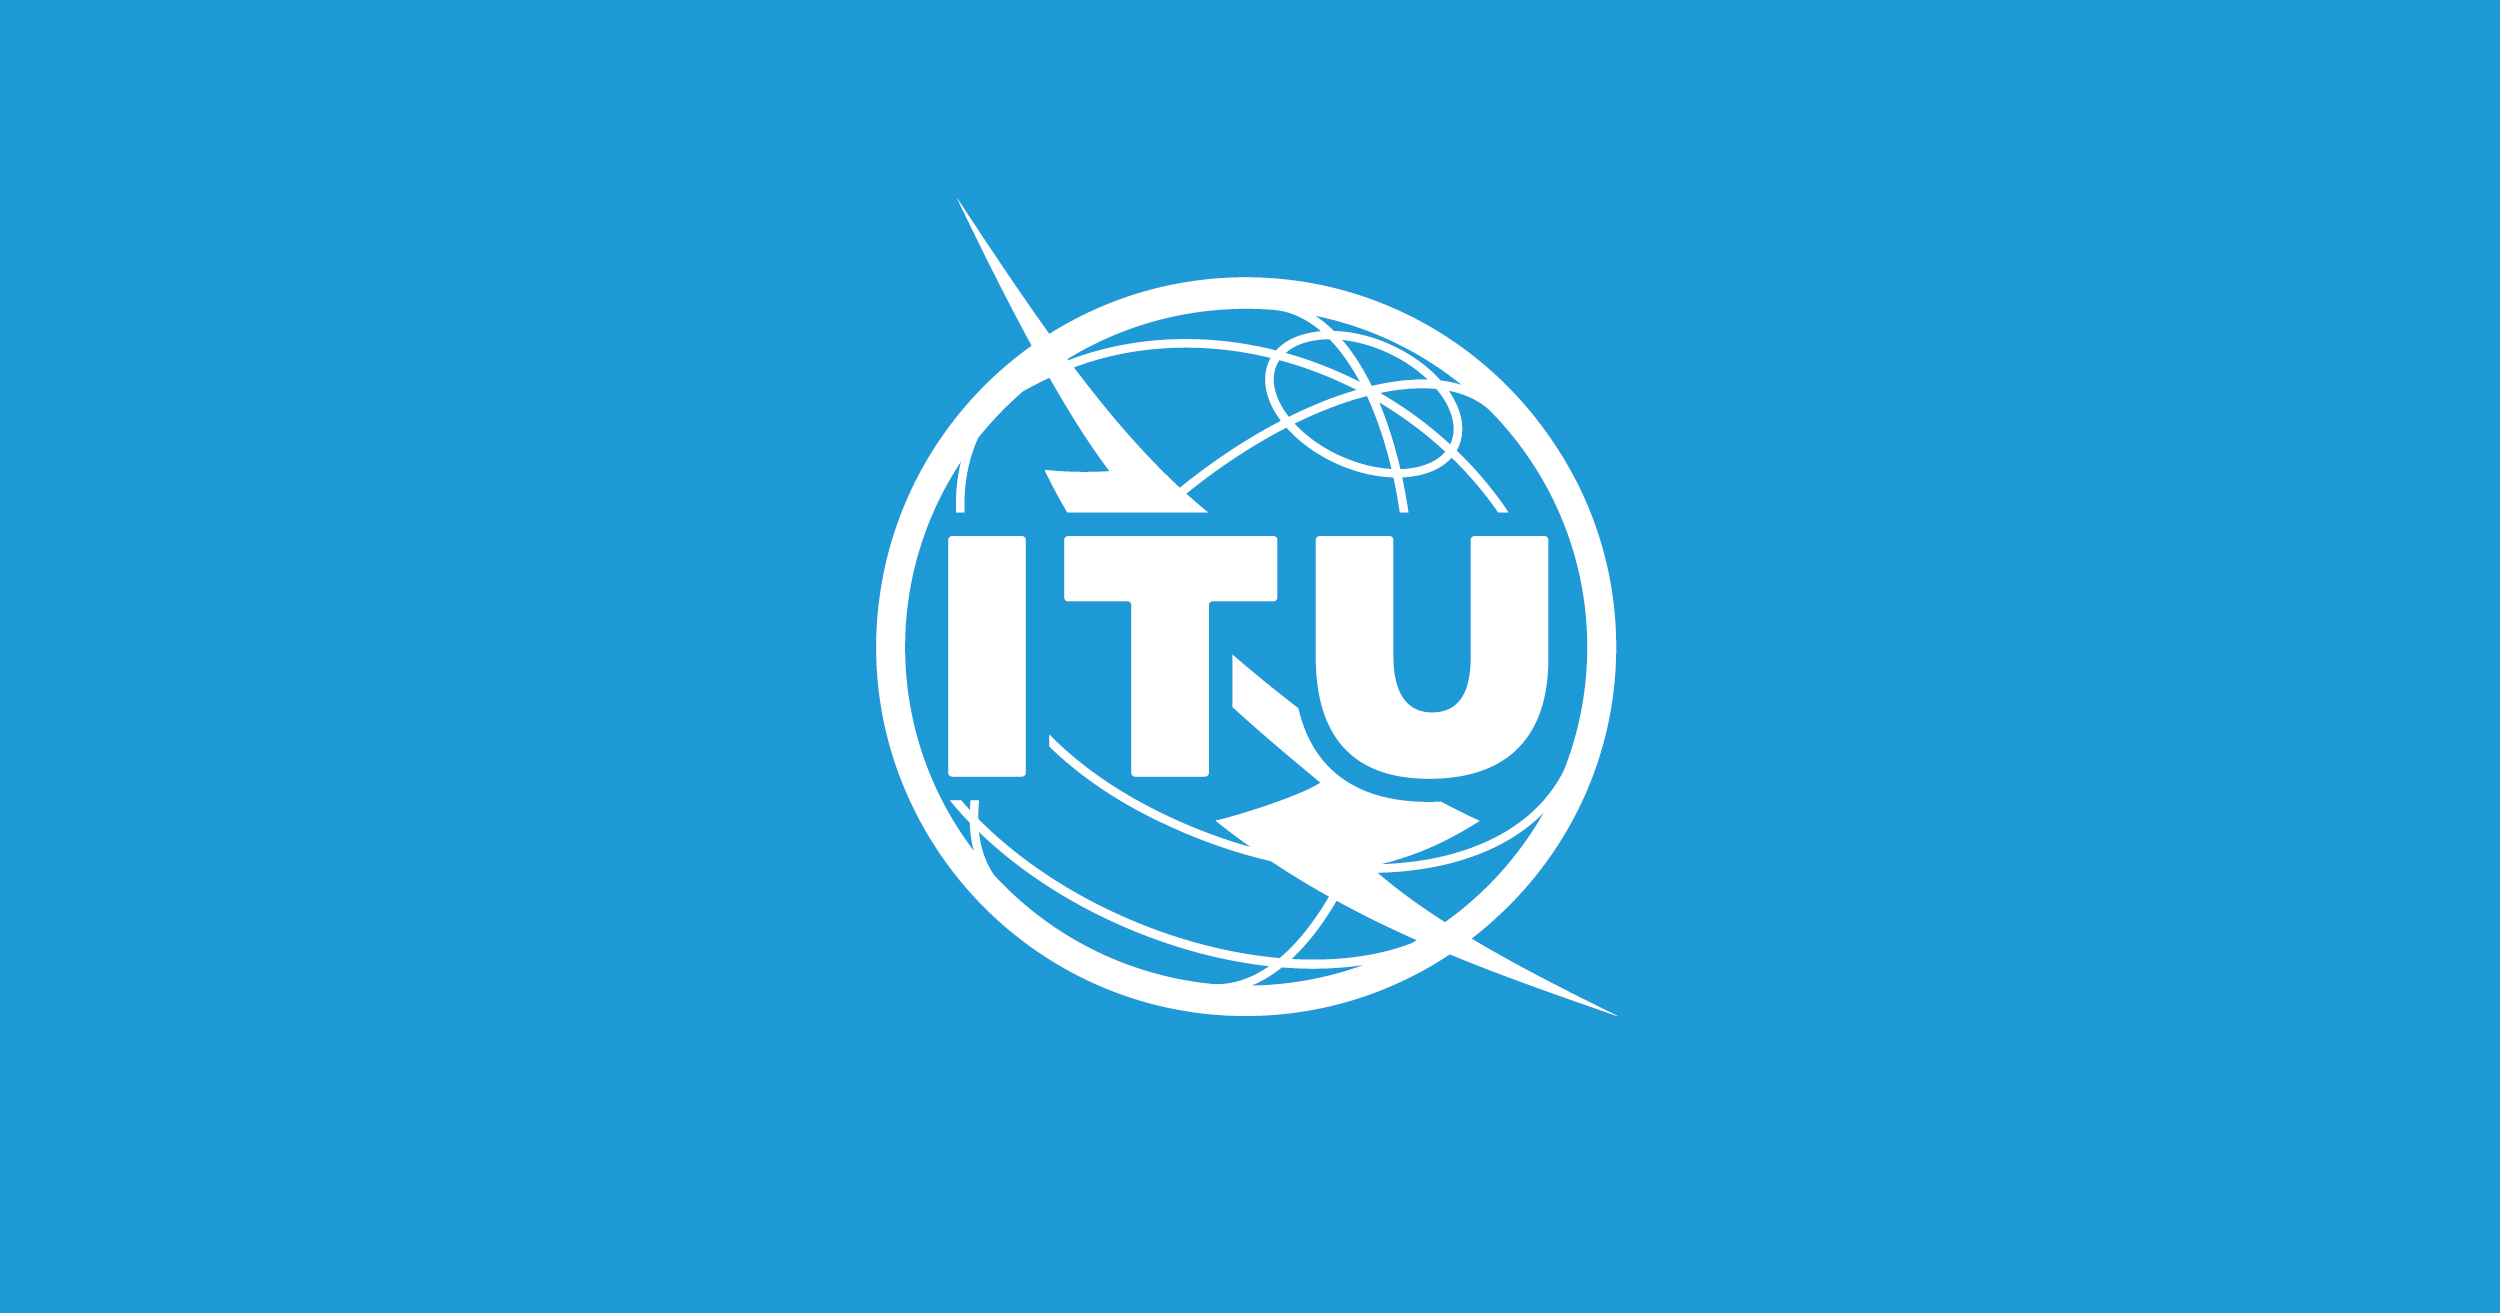 ITU: Committed to connecting the world